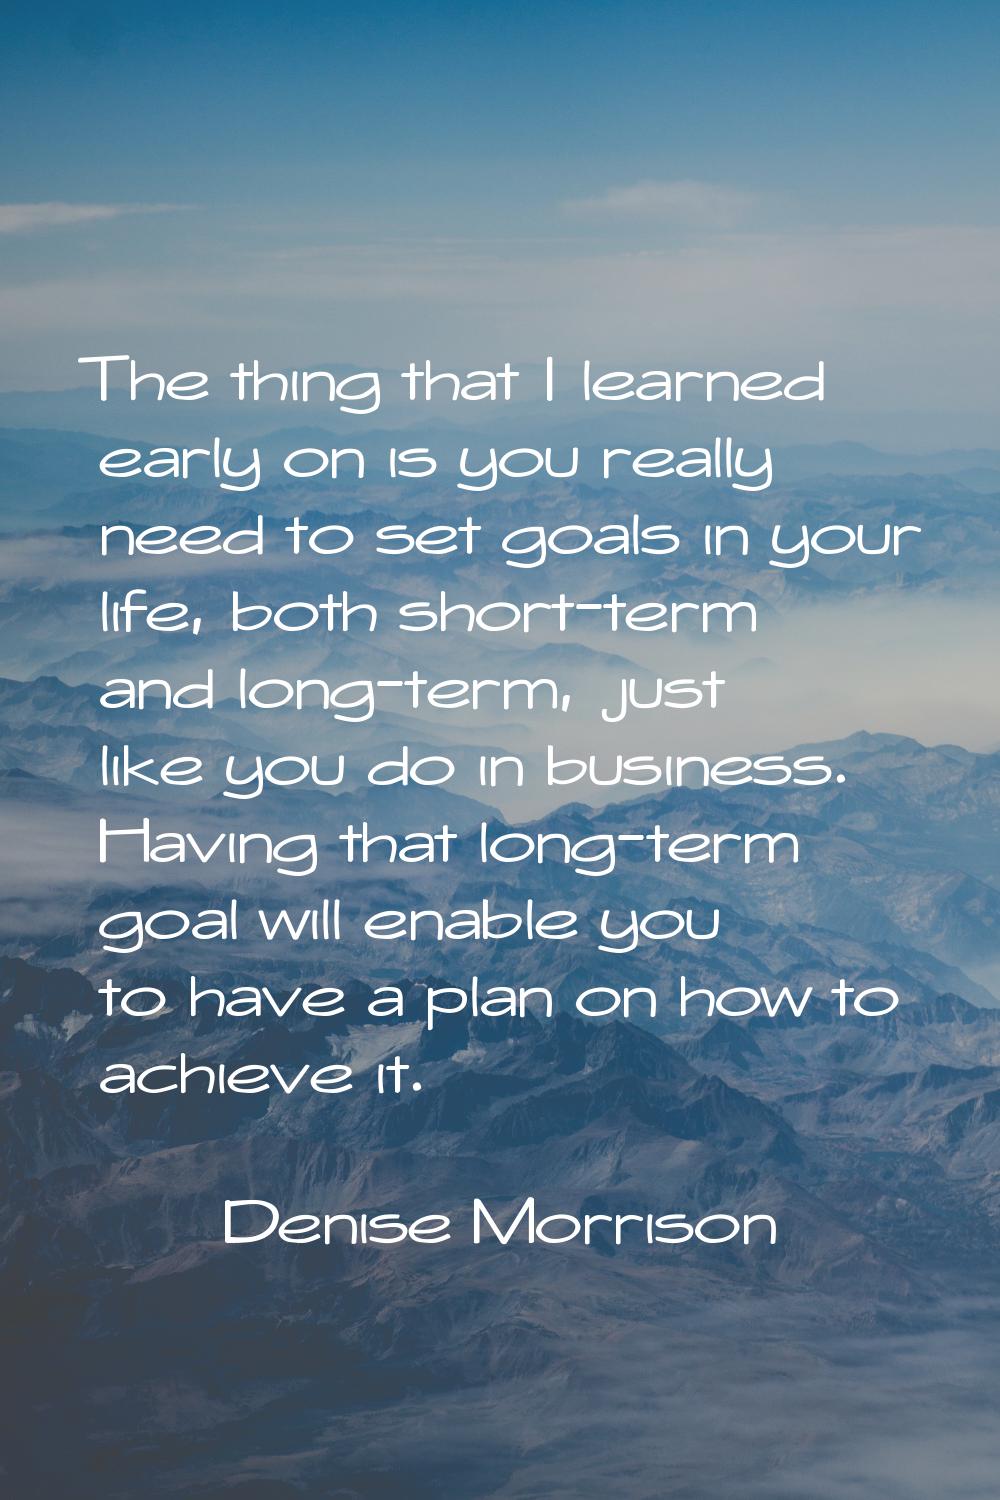 The thing that I learned early on is you really need to set goals in your life, both short-term and